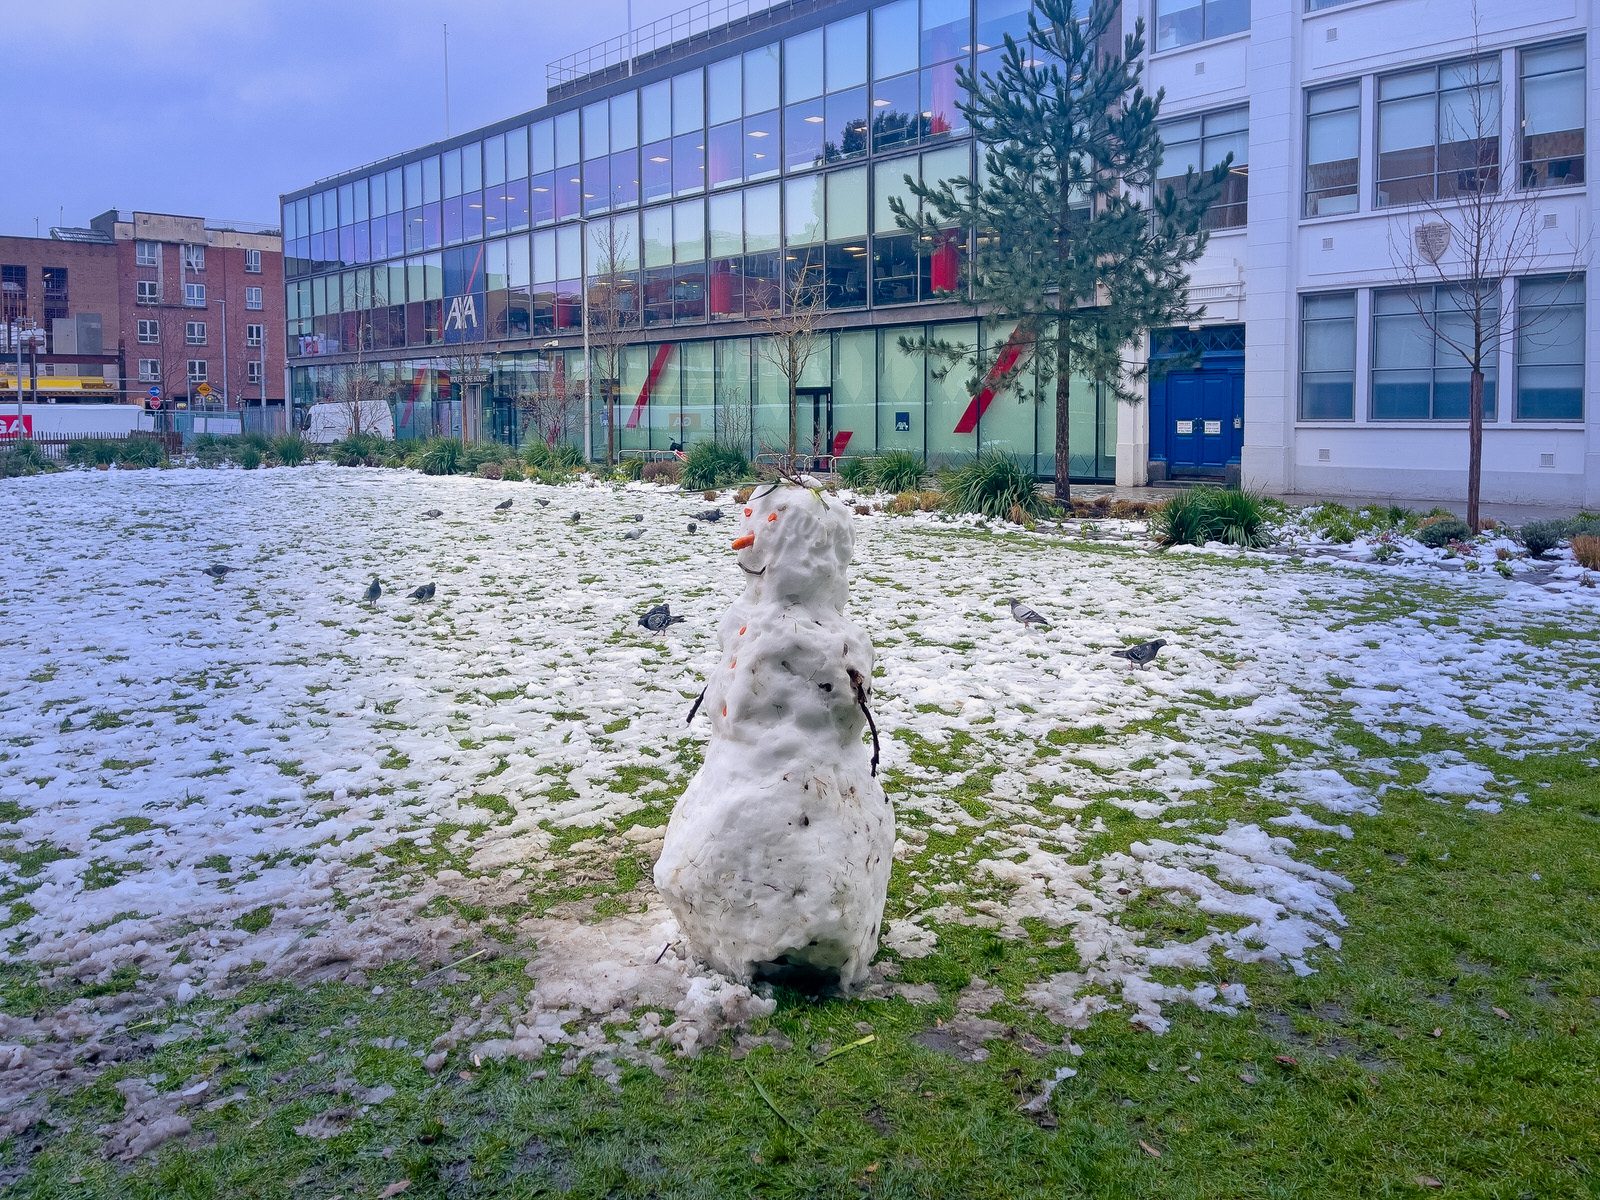 A WELL DRESSED BUT LONELY SNOWMAN [WOLFE TONE PARK IN DUBLIN]-228981-1